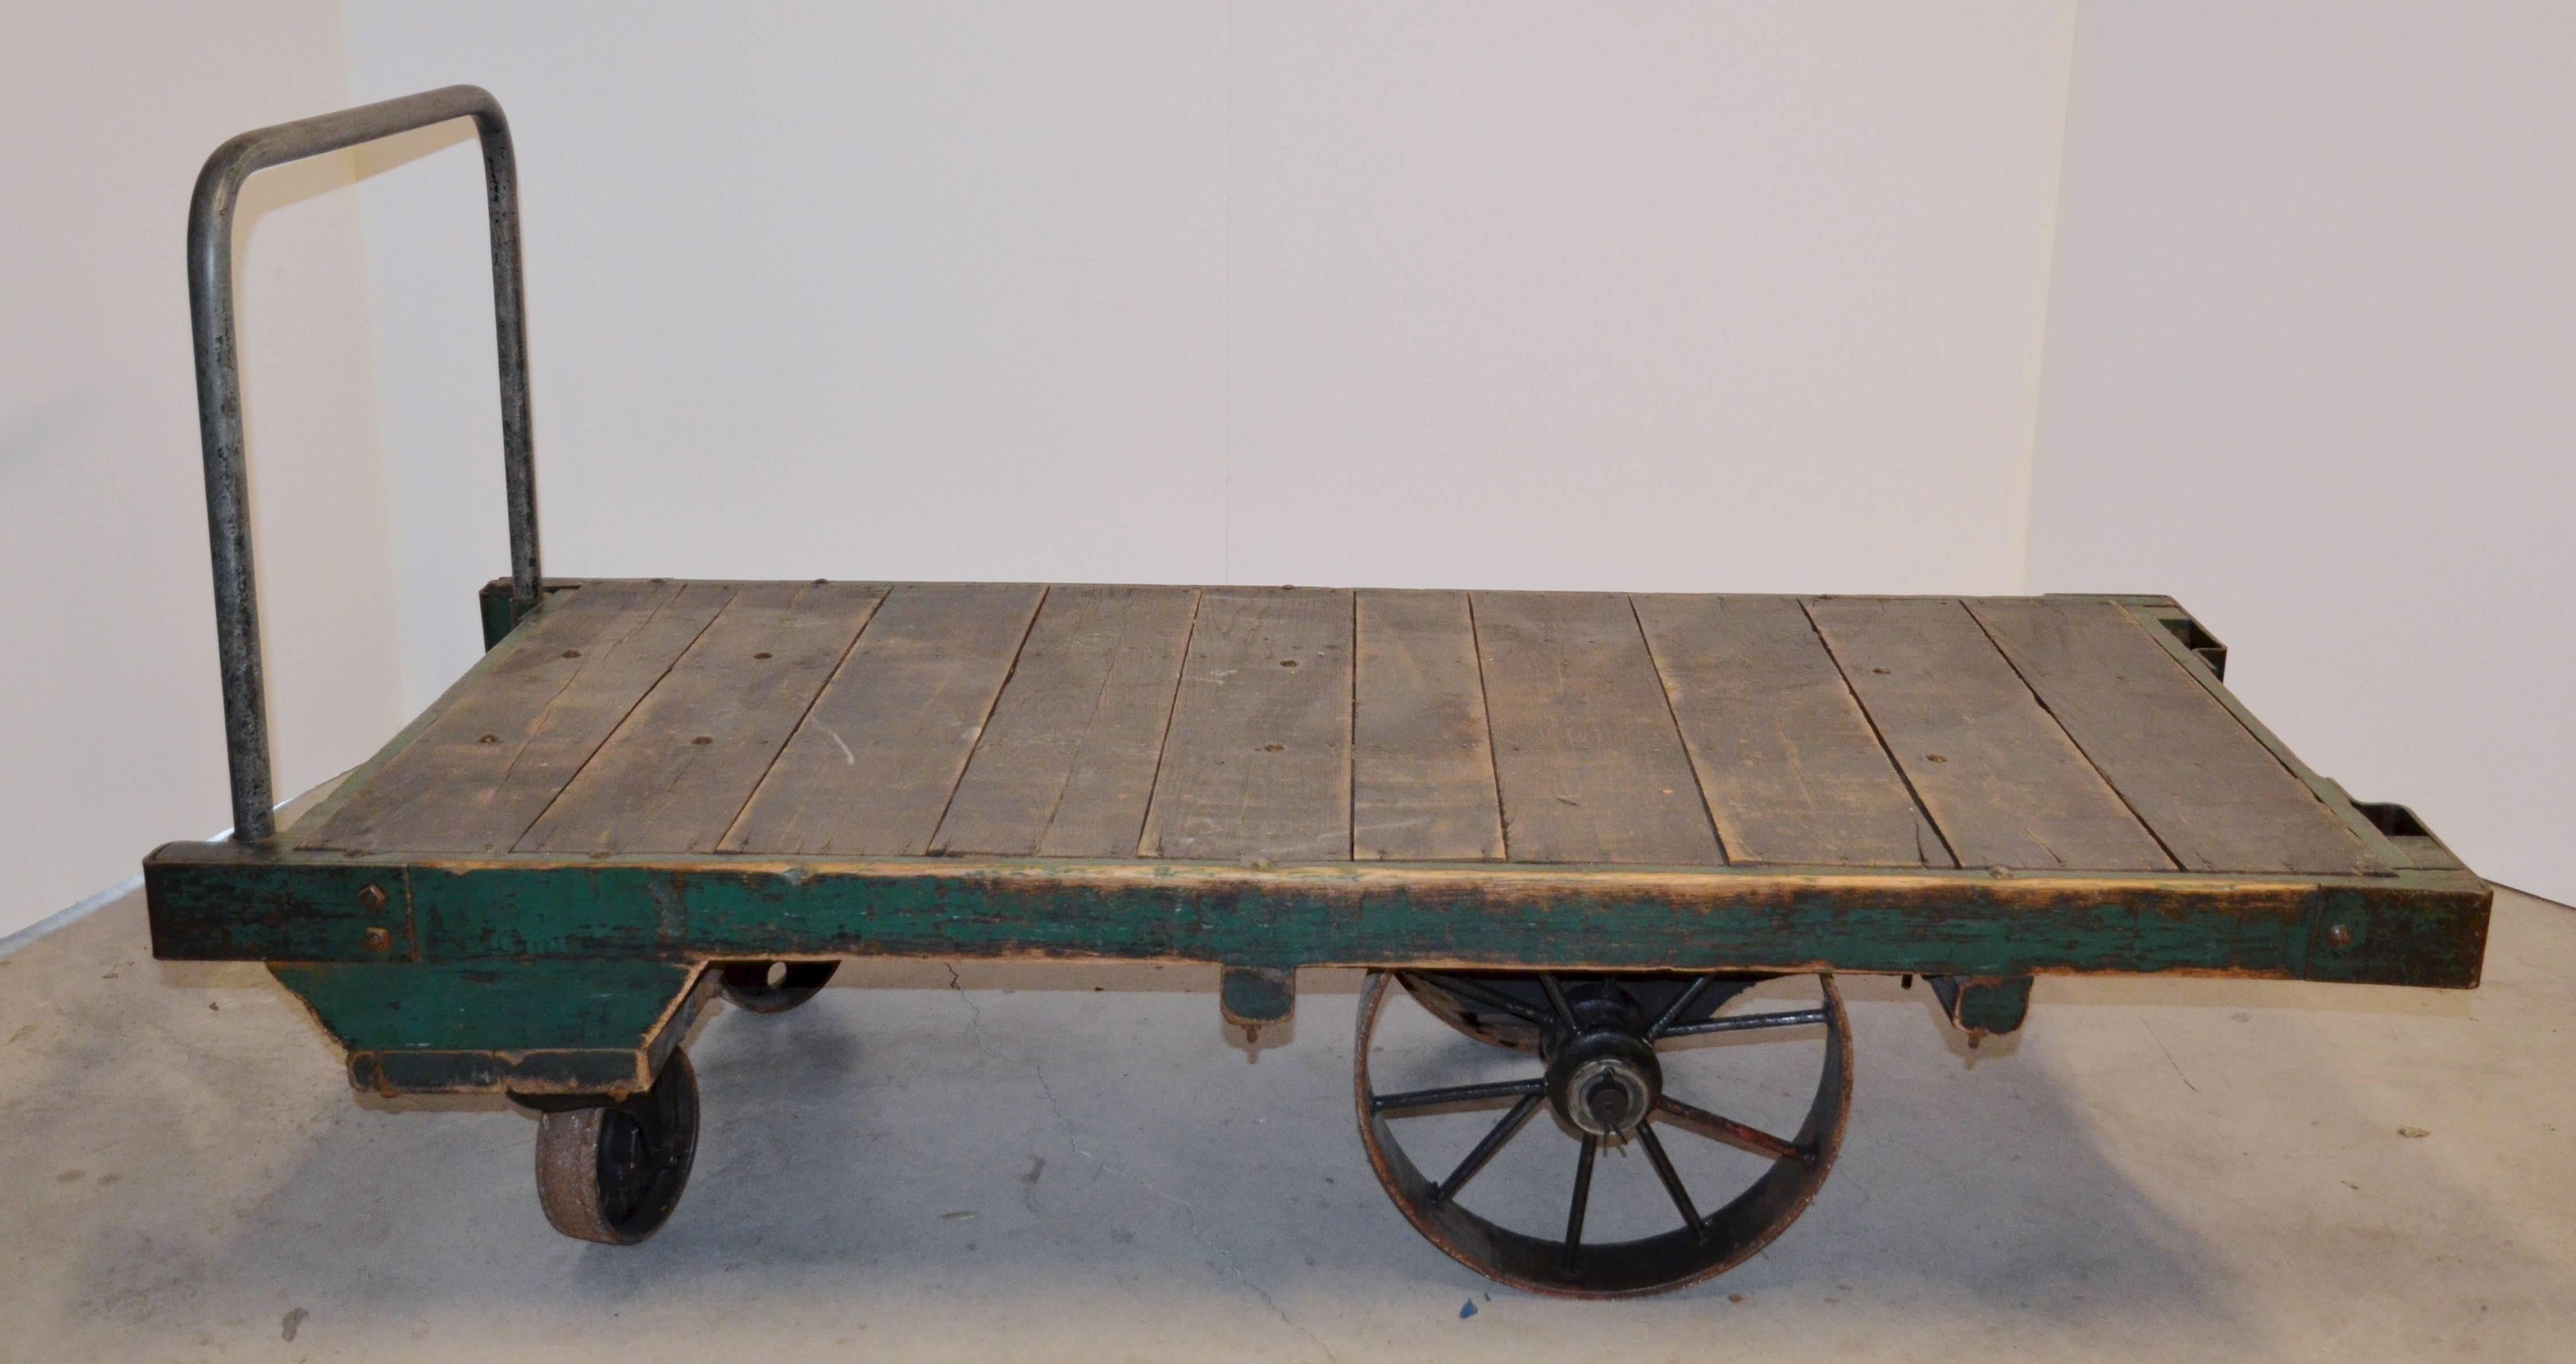 Large scale cart from a Mid-west factory makes a cool industrial cocktail table.  Four opersteel wheels and painted wood top, all original.  Removable handle (see photos).  Without the handle the cart height is 19